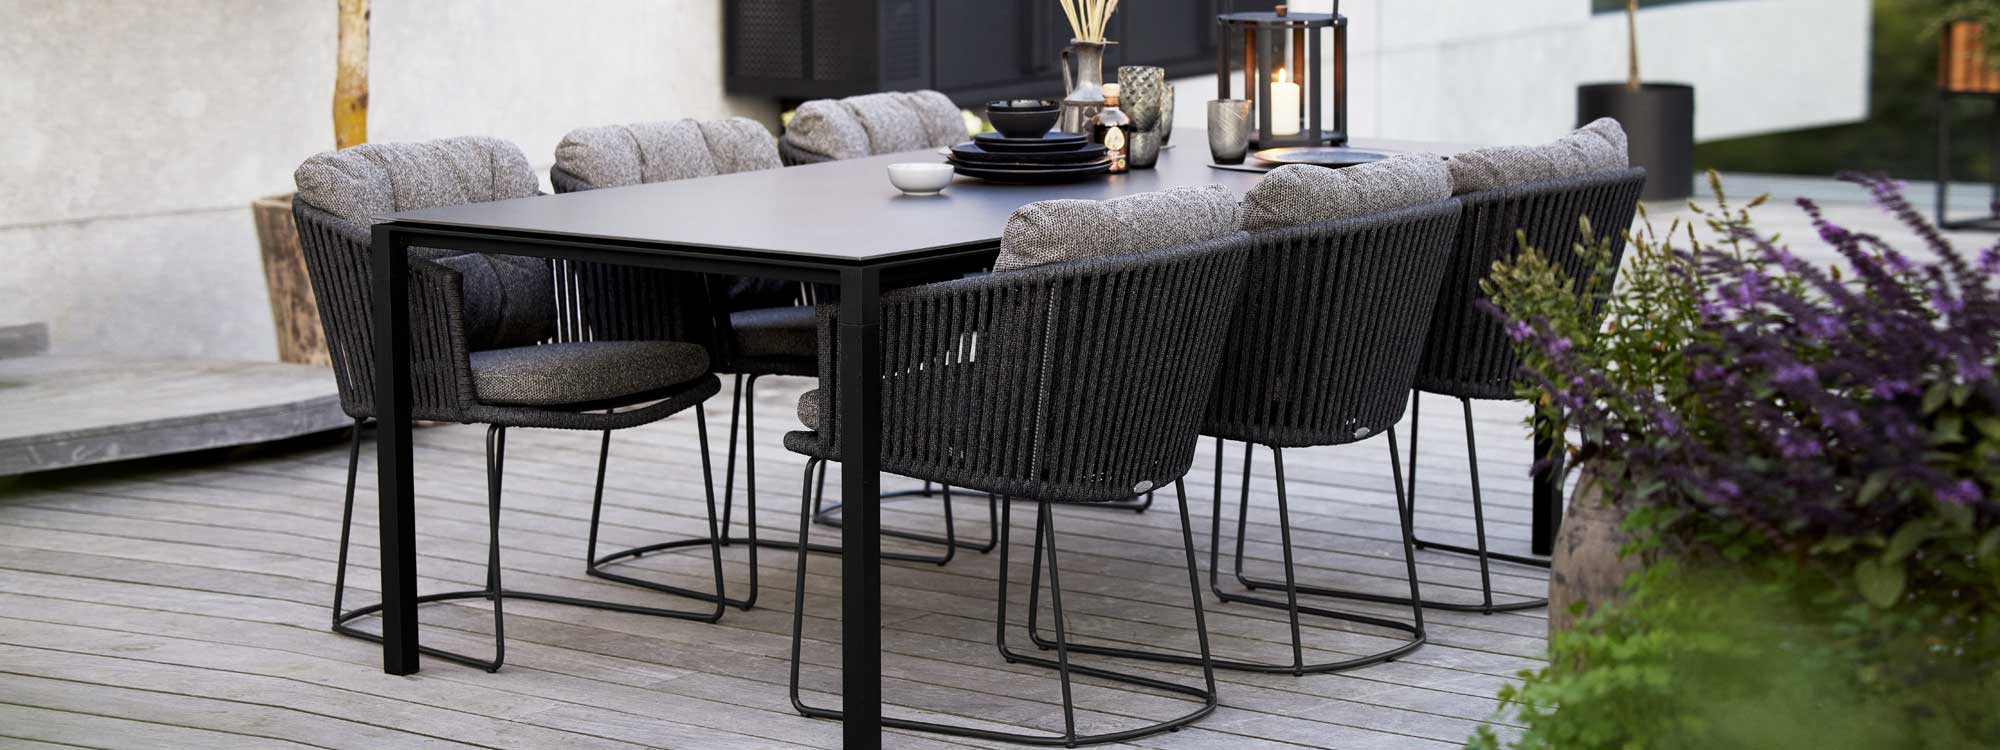 Image of dark-grey Moments garden chairs and Lava-grey Pure rectangular dining table by Cane-line